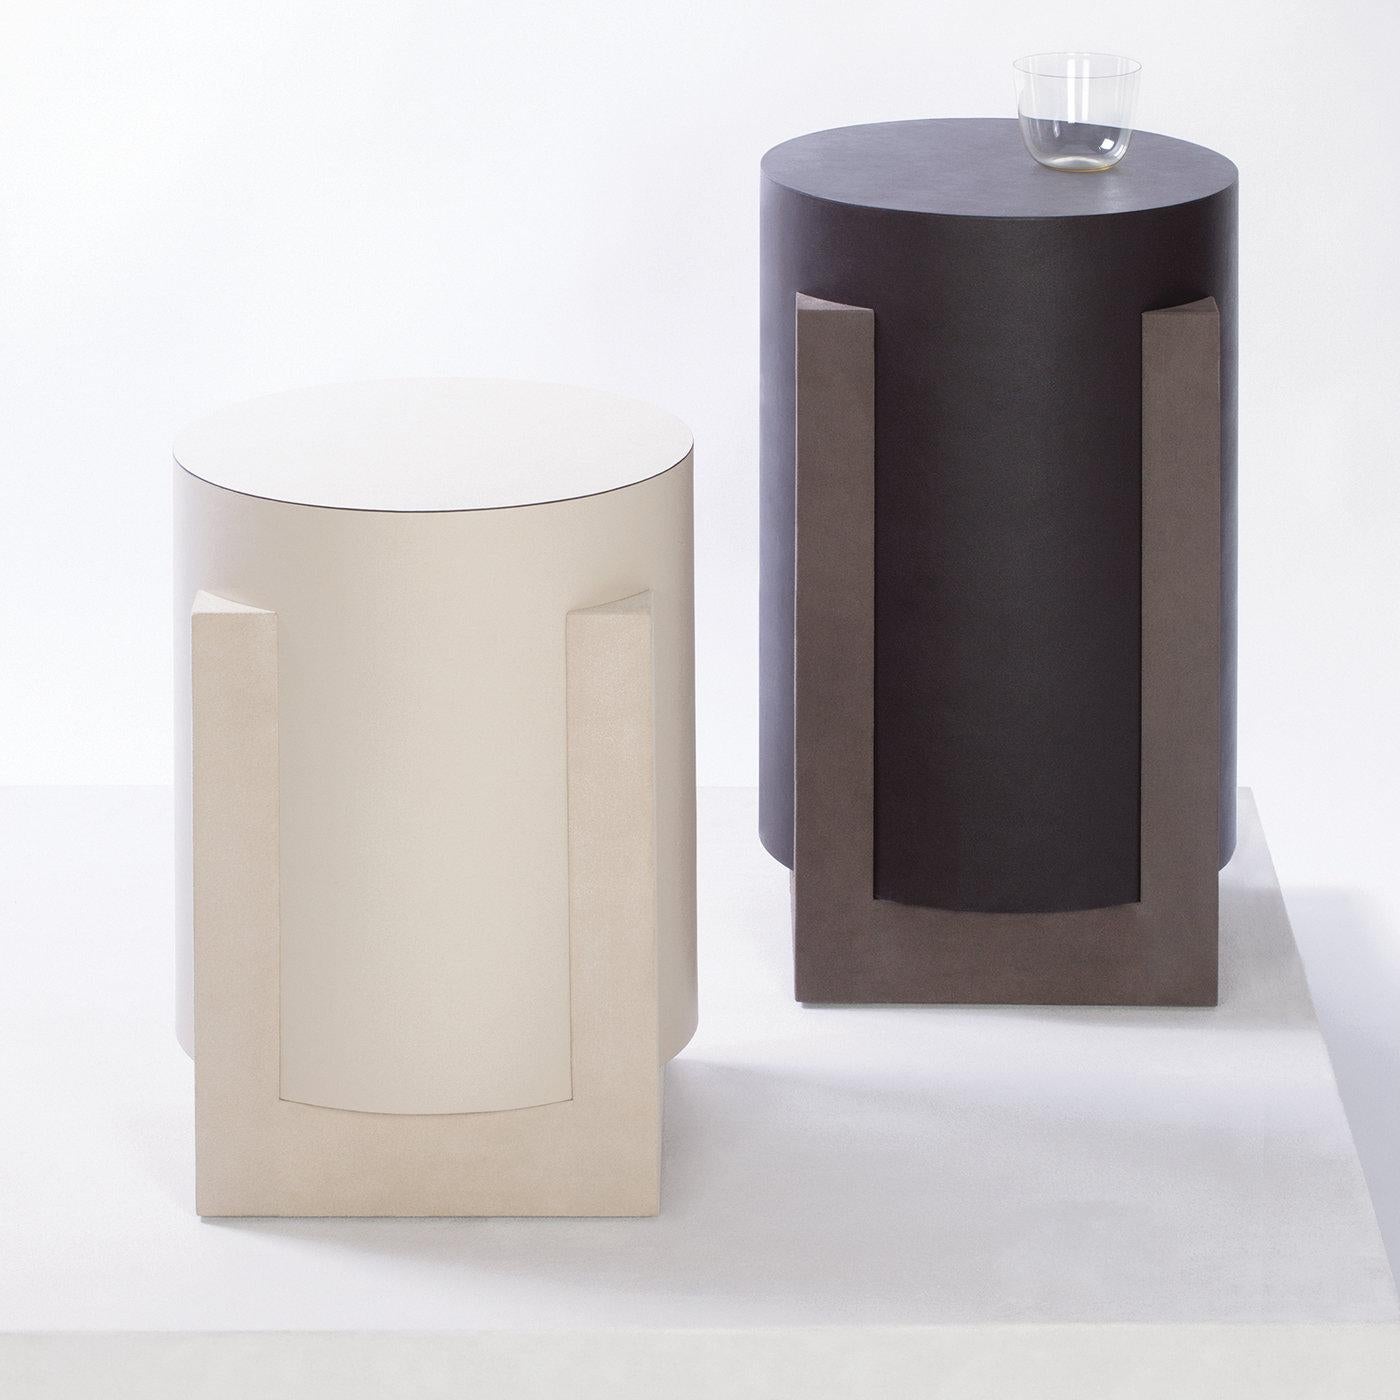 Contemporary leather stool - Palazzo by Stephane Parmentier for Giobagnara.
The object presented in the image has following finish: F95 Off White Nappa Leather and A06 Ivory Suede Leather (base).

Characterized by an intersection of pure shapes